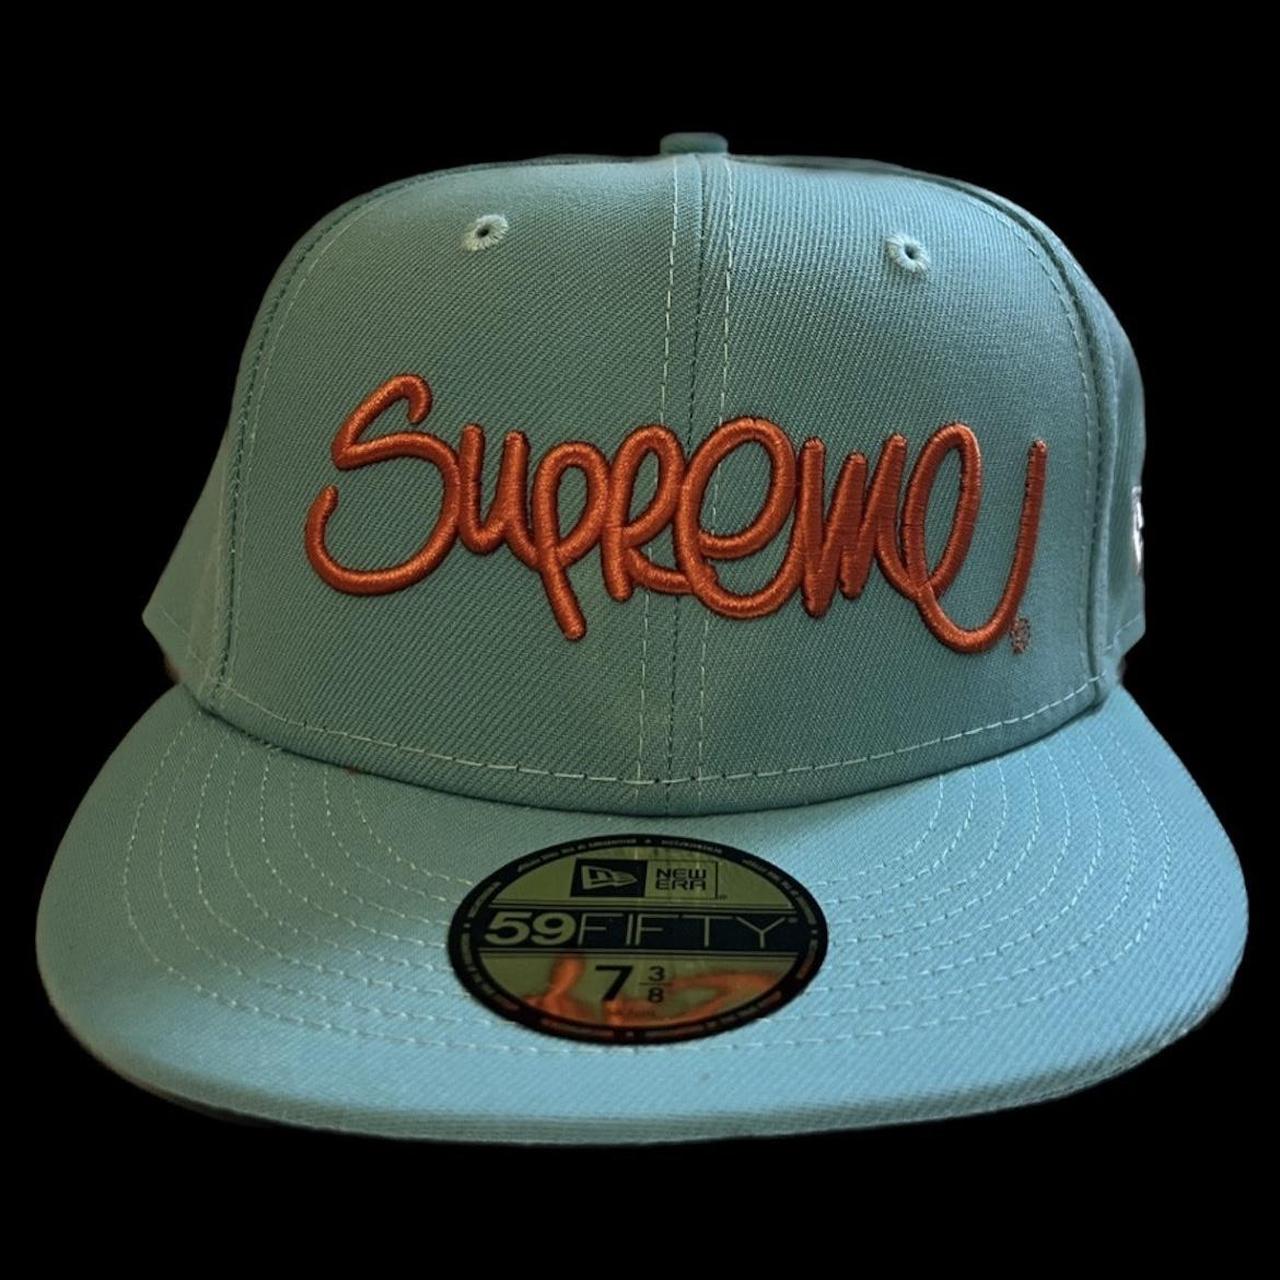 Supreme fitted hat - Handstyle New Era “Mint”, 7 3/8 fit